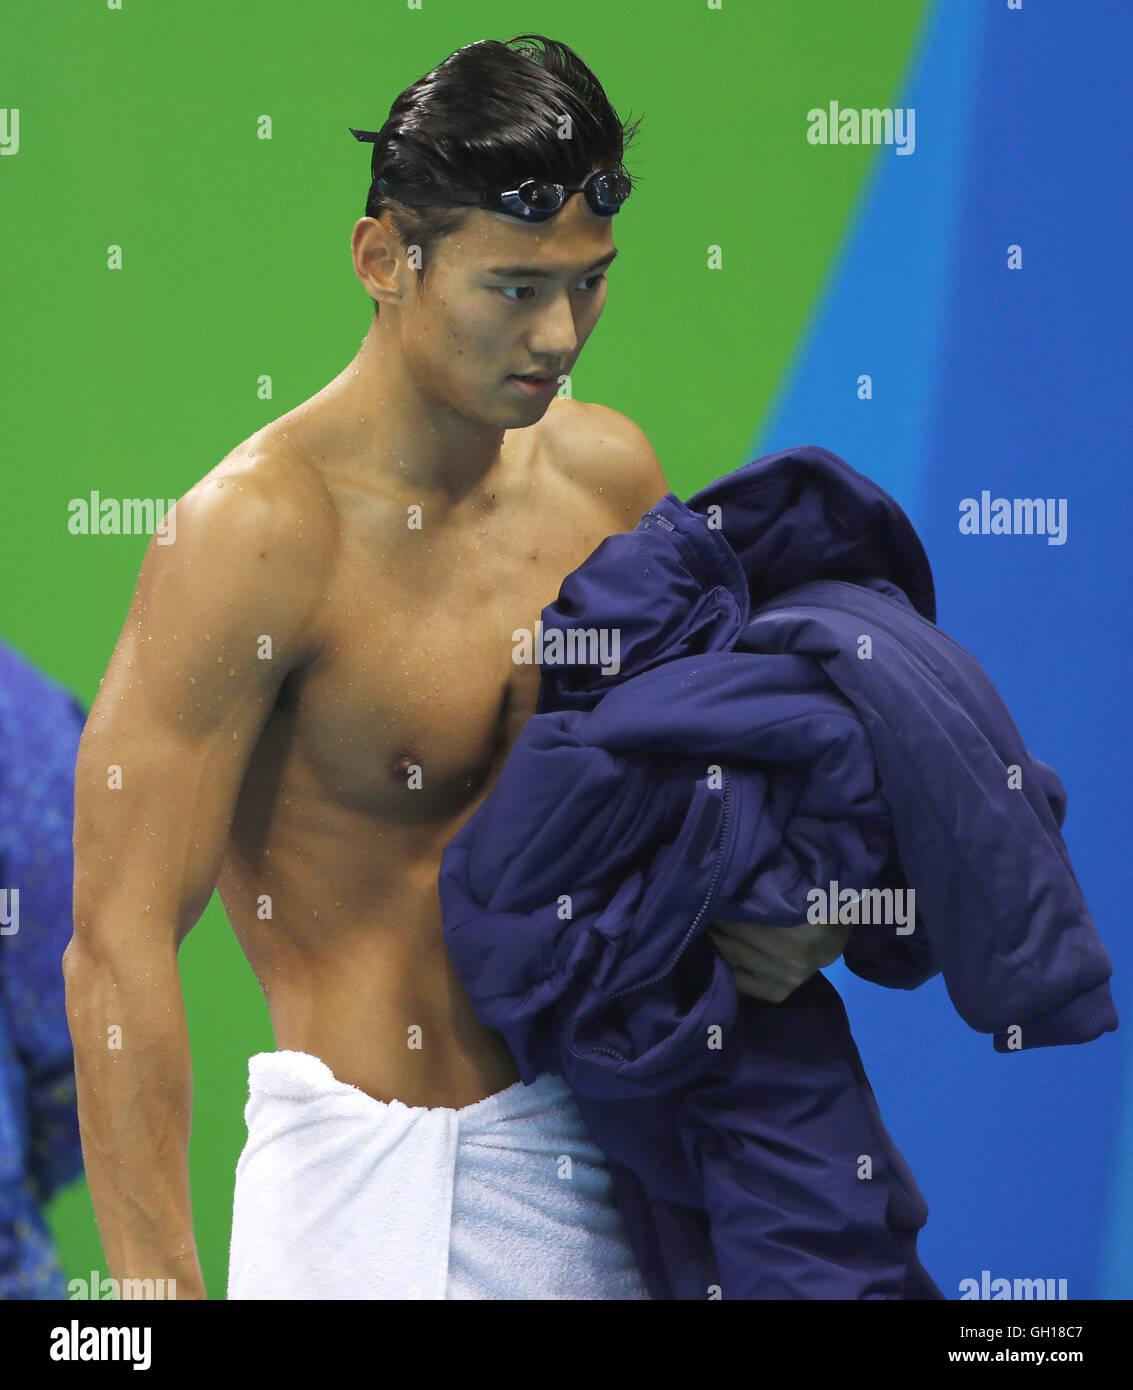 Rio de Janeiro, Brazil. 07th Aug, 2016. Ning Zetao of China reacts after a heat of men's 4X100m freestyle relay of swimming at the 2016 Rio Olympic Games in Rio de Janeiro, Brazil, on Aug. 7, 2016. Credit:  Xinhua/Alamy Live News Stock Photo